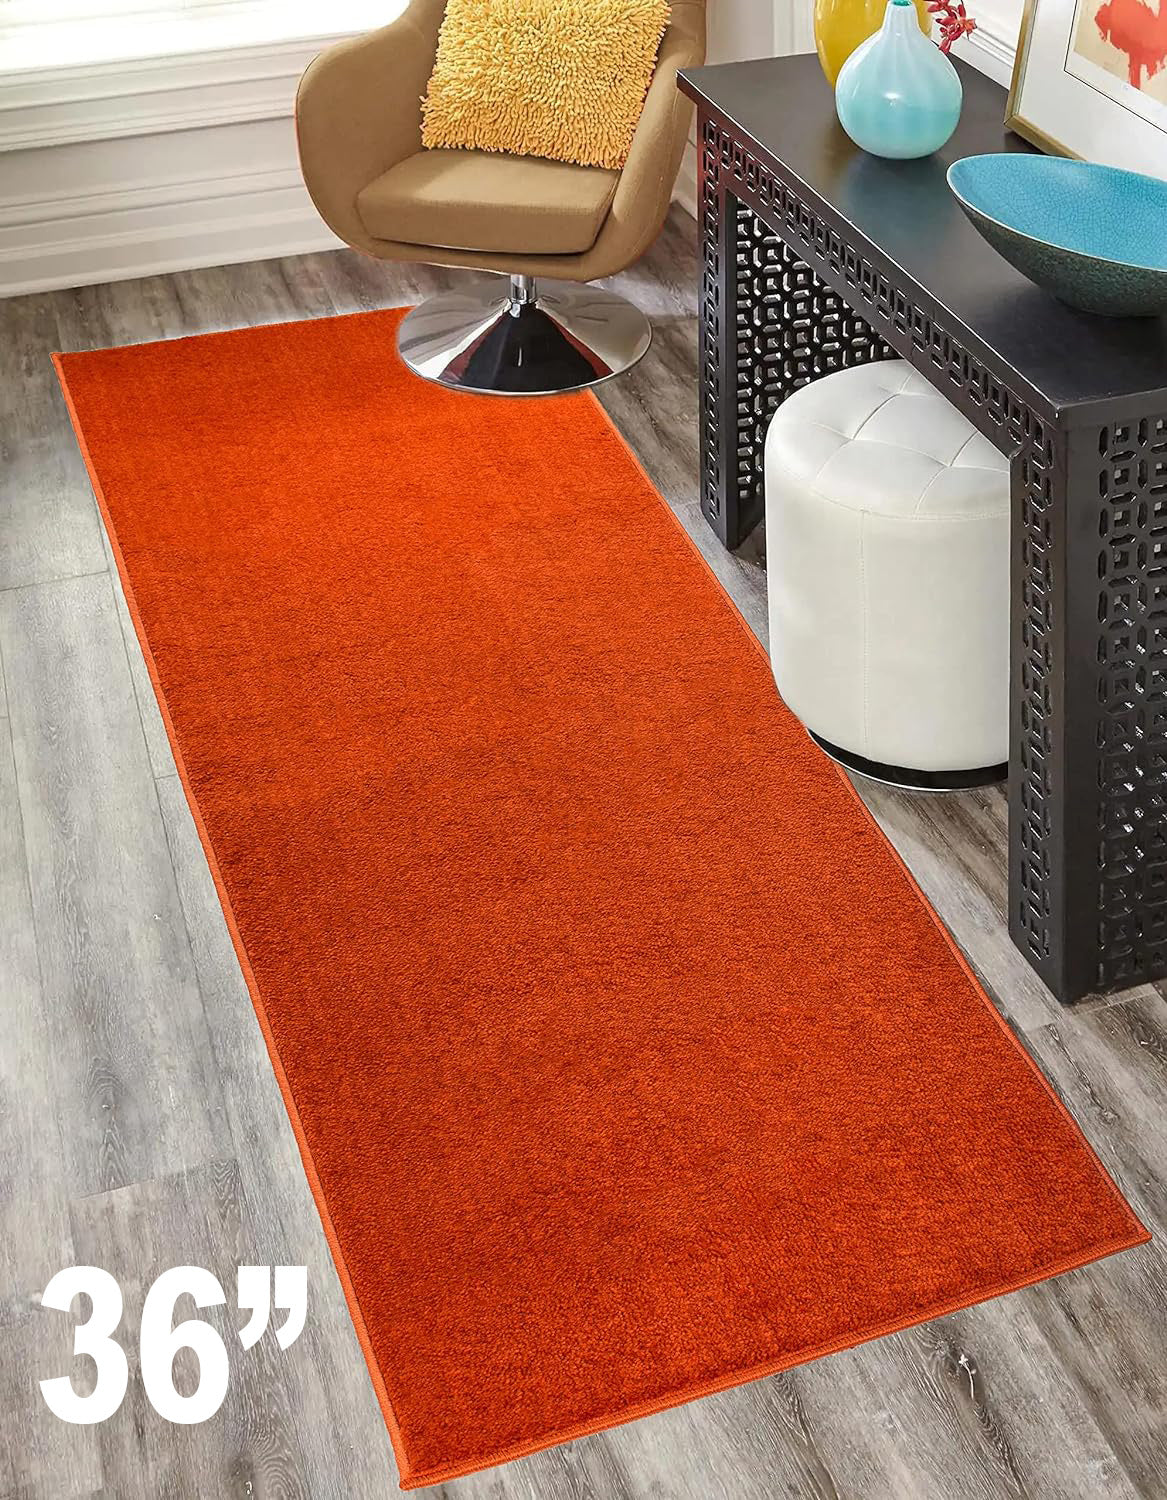 Machine Washable Custom Size Runner Rug Solid Orange Color Skid Resistant Rug Runner Customize Up to 50 Feet and 36 Inch Width Runner Rug